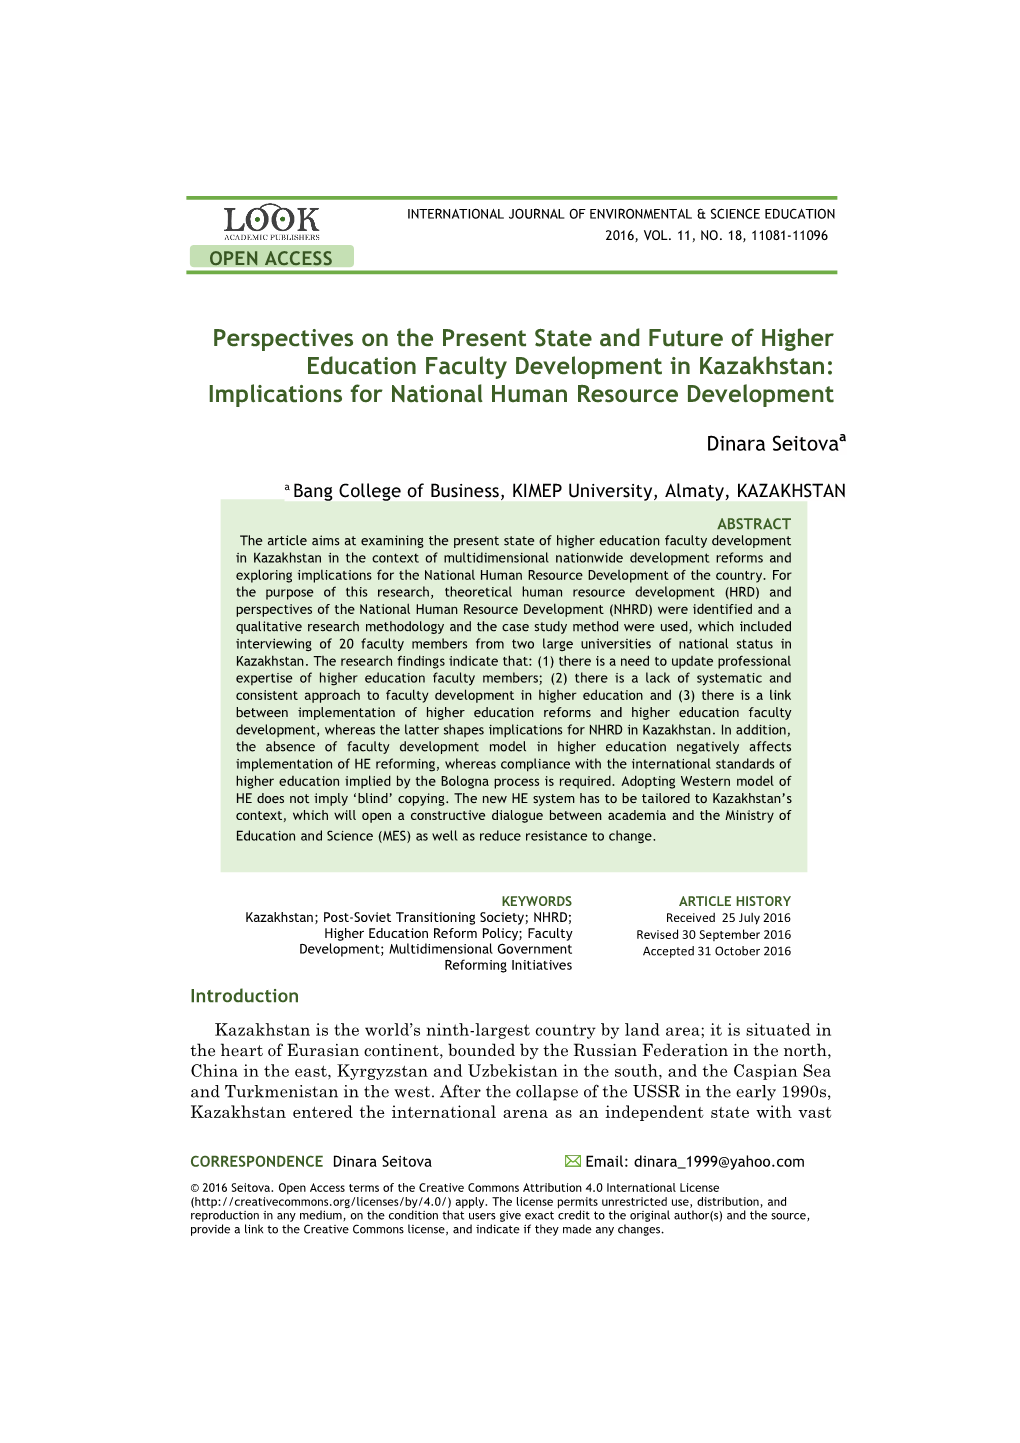 Perspectives on the Present State and Future of Higher Education Faculty Development in Kazakhstan: Implications for National Human Resource Development